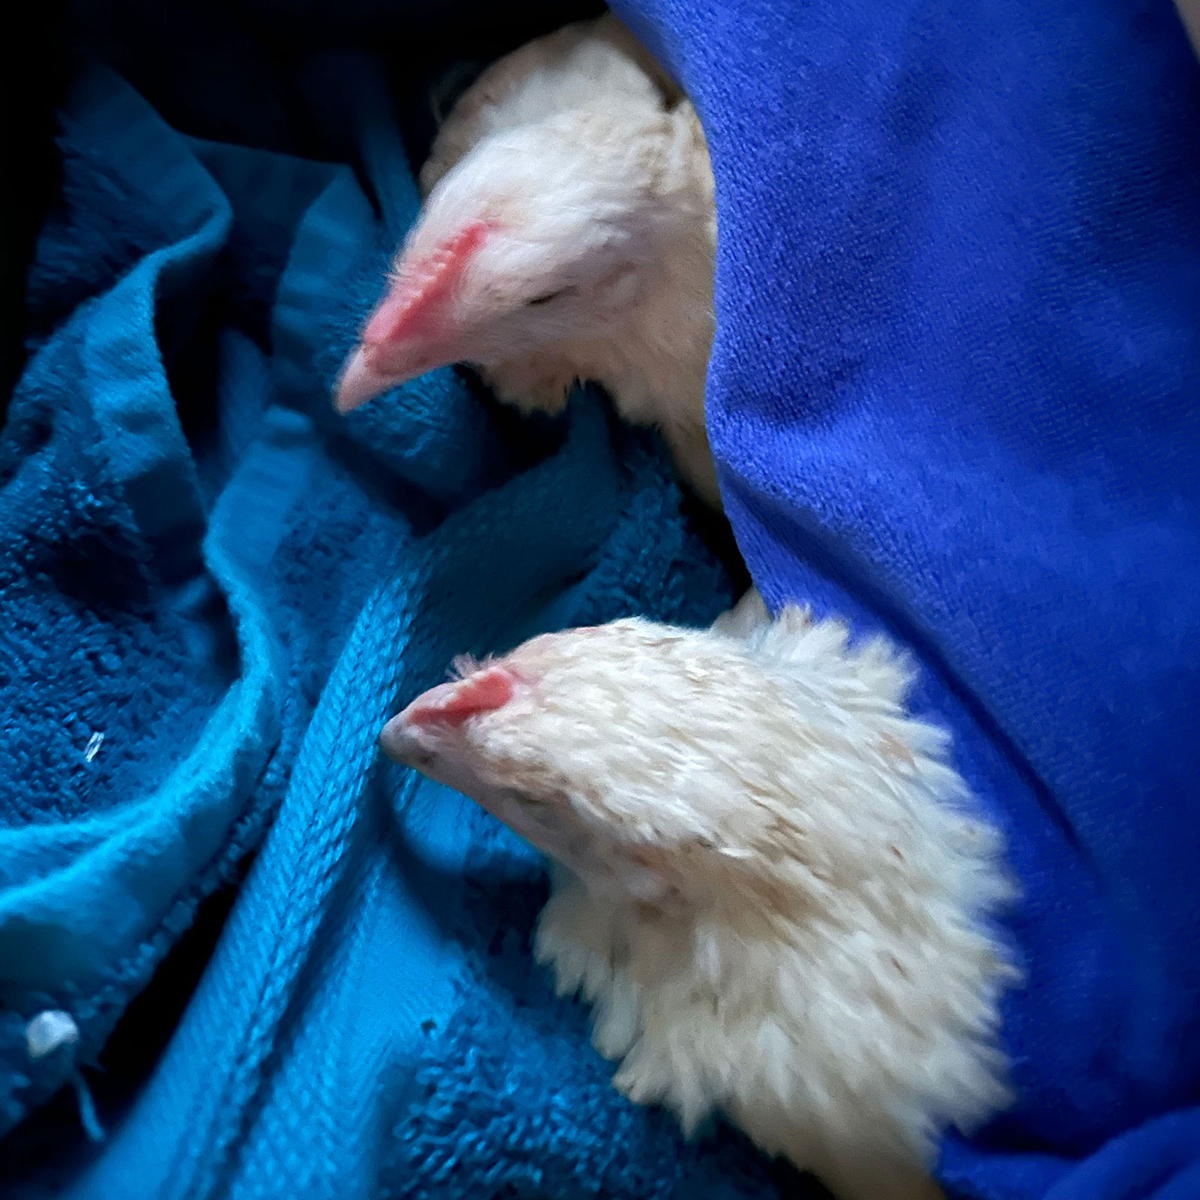 Two chickens wrapped up in a towel